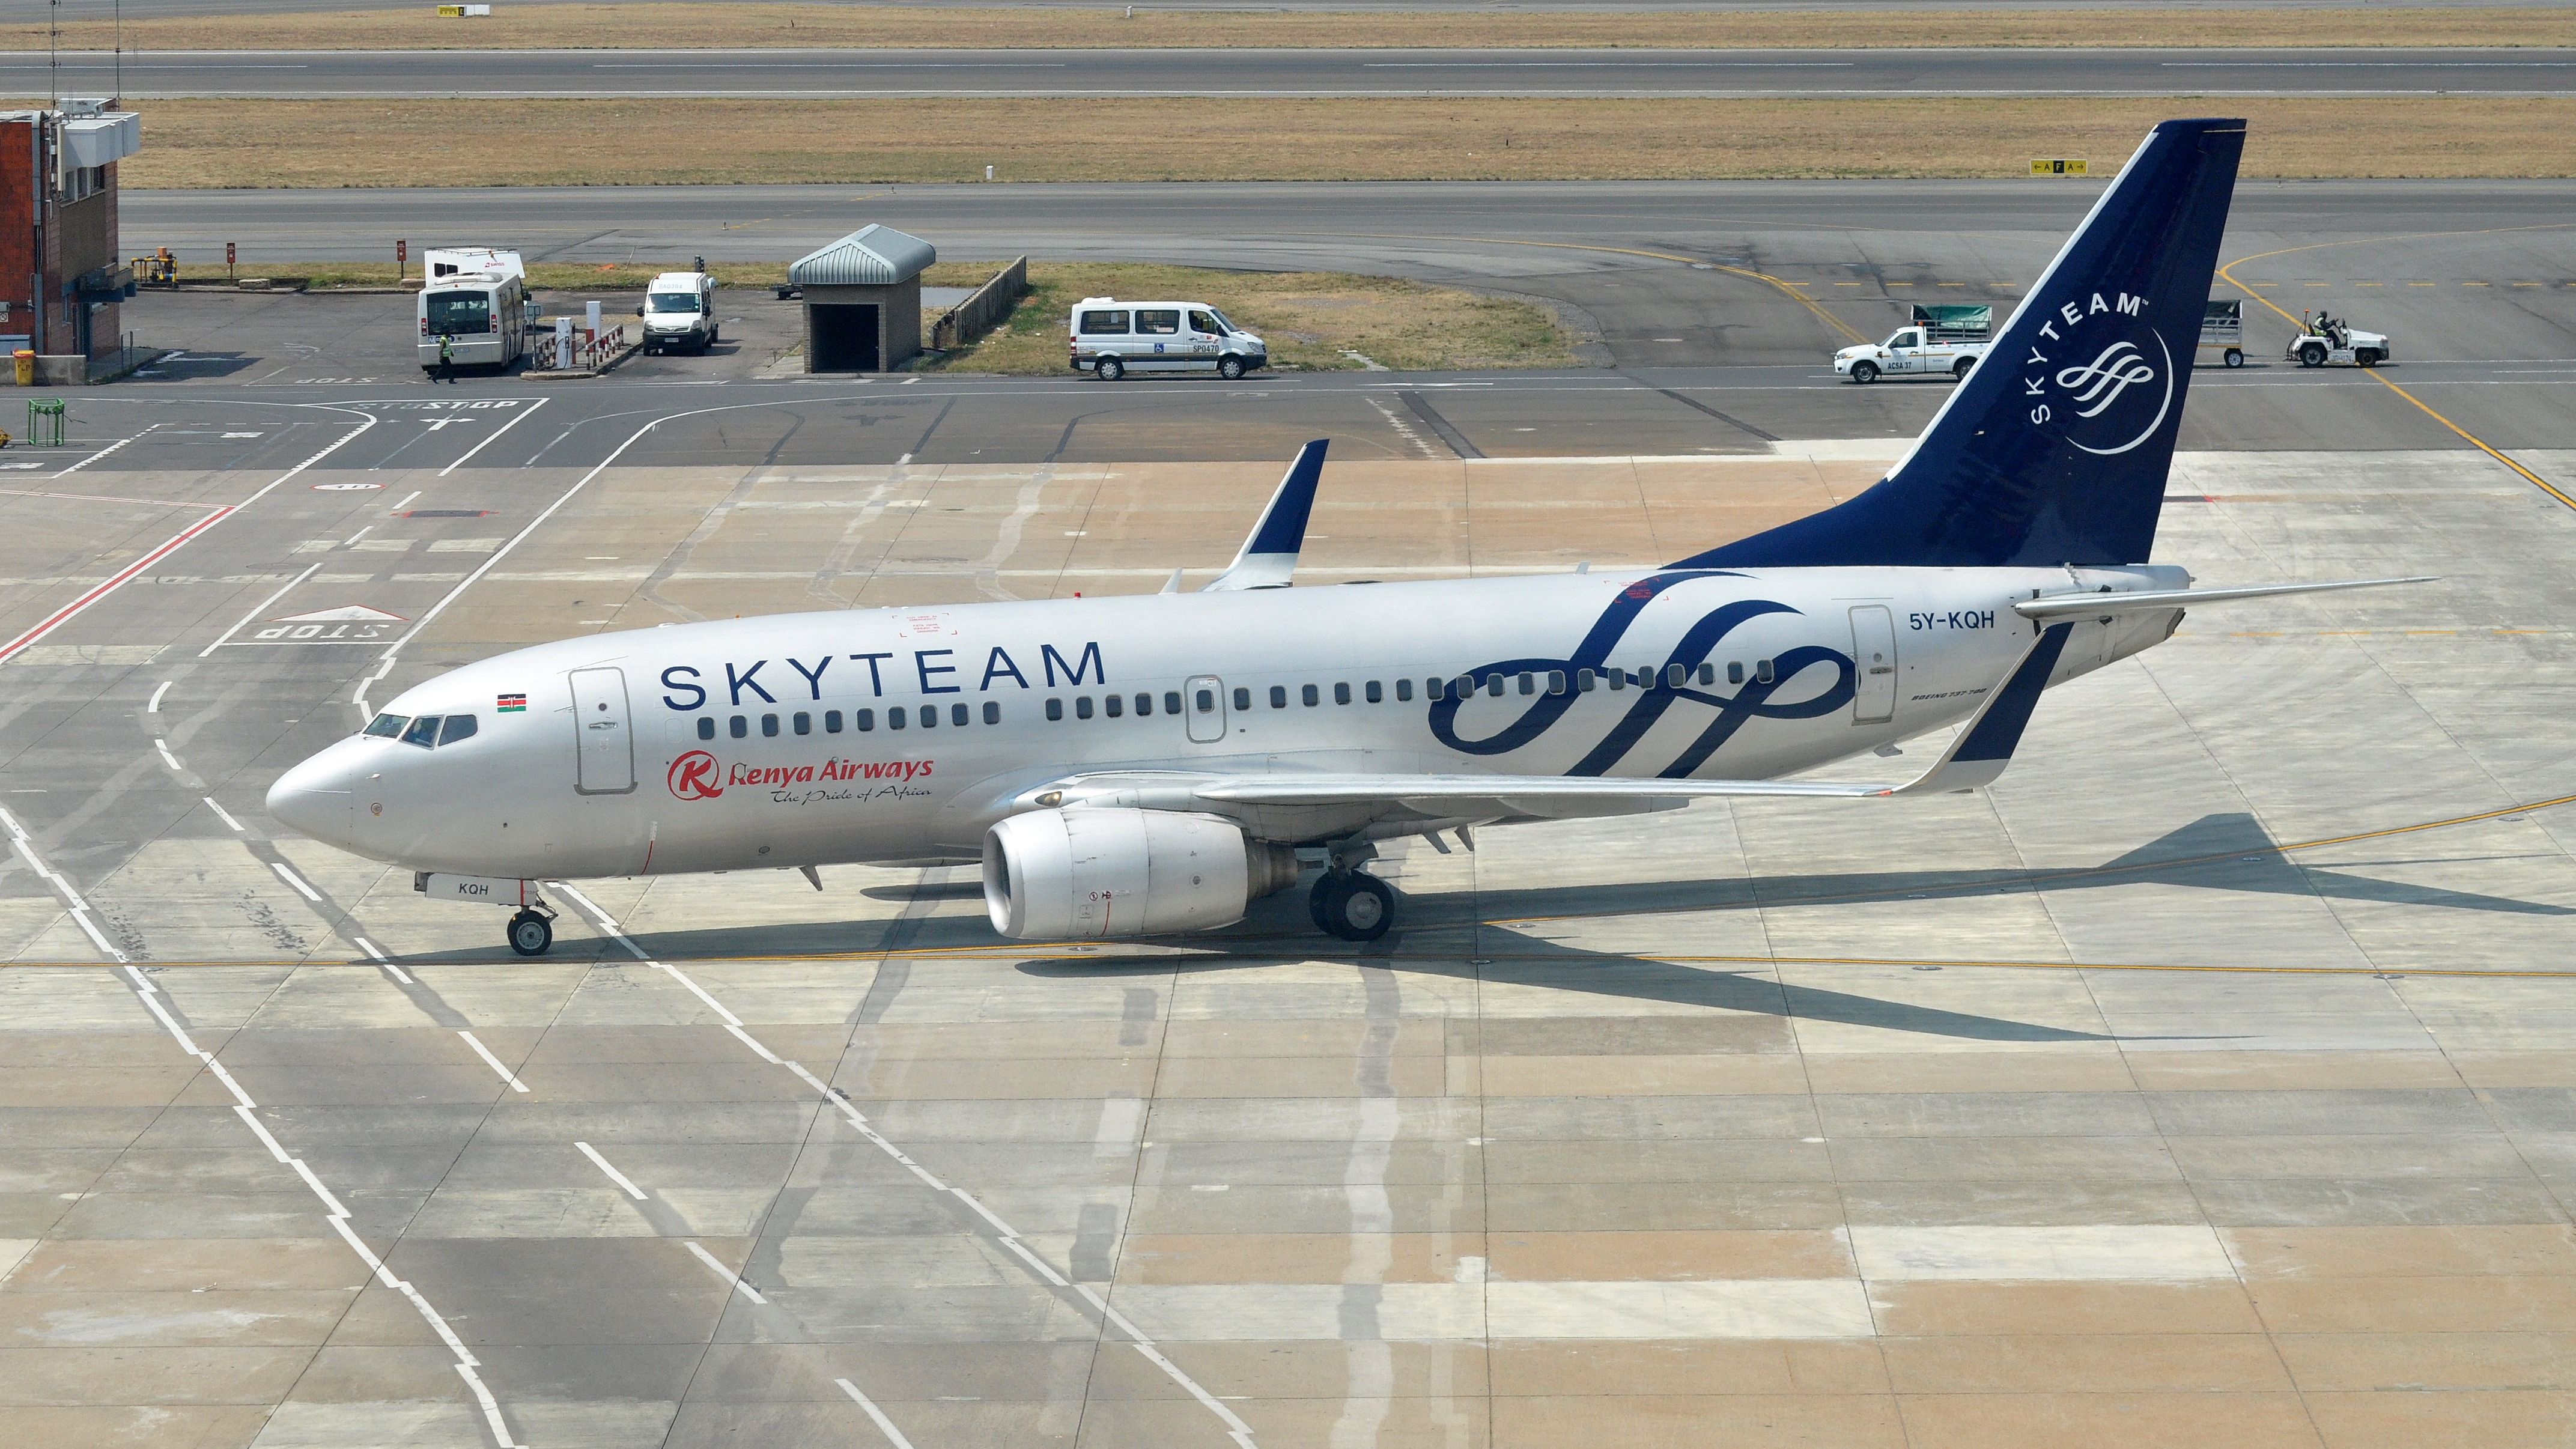 A Kenya Airways Boeing 737 in SkyTeam livery taxiing at an airport.